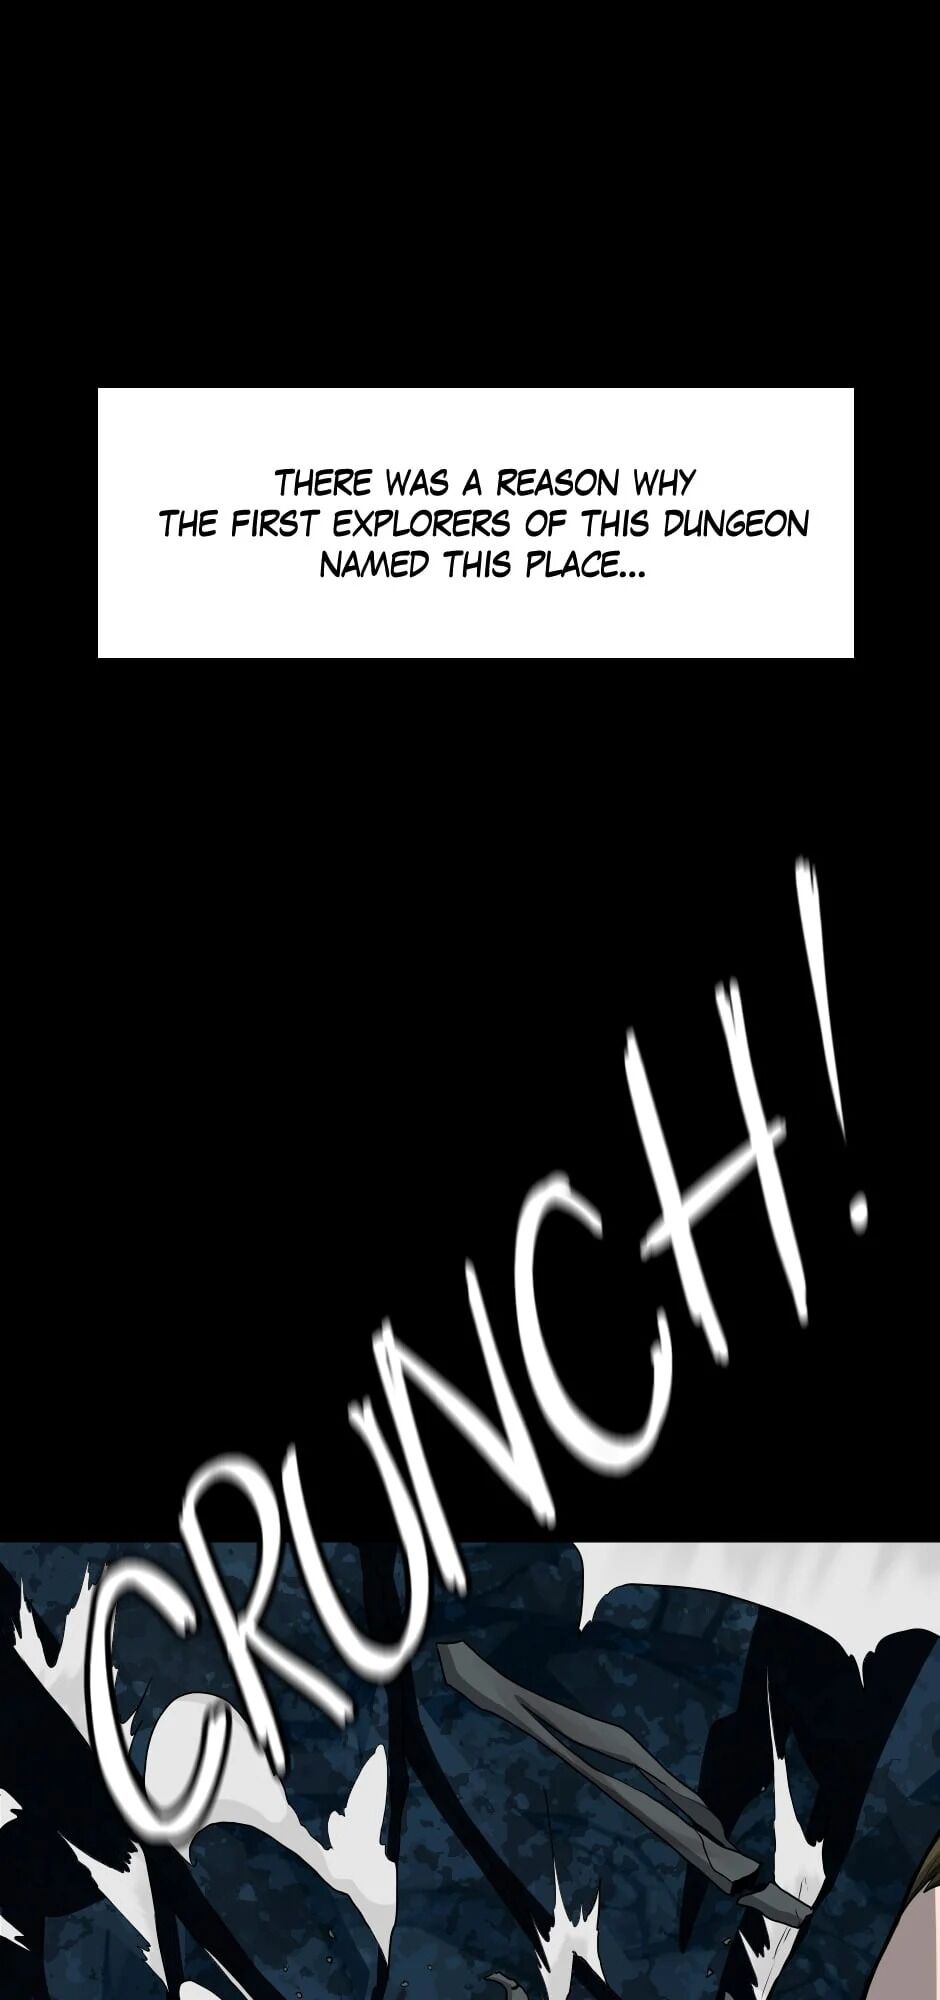 The Beginning After The End Chapter 59 Fixed